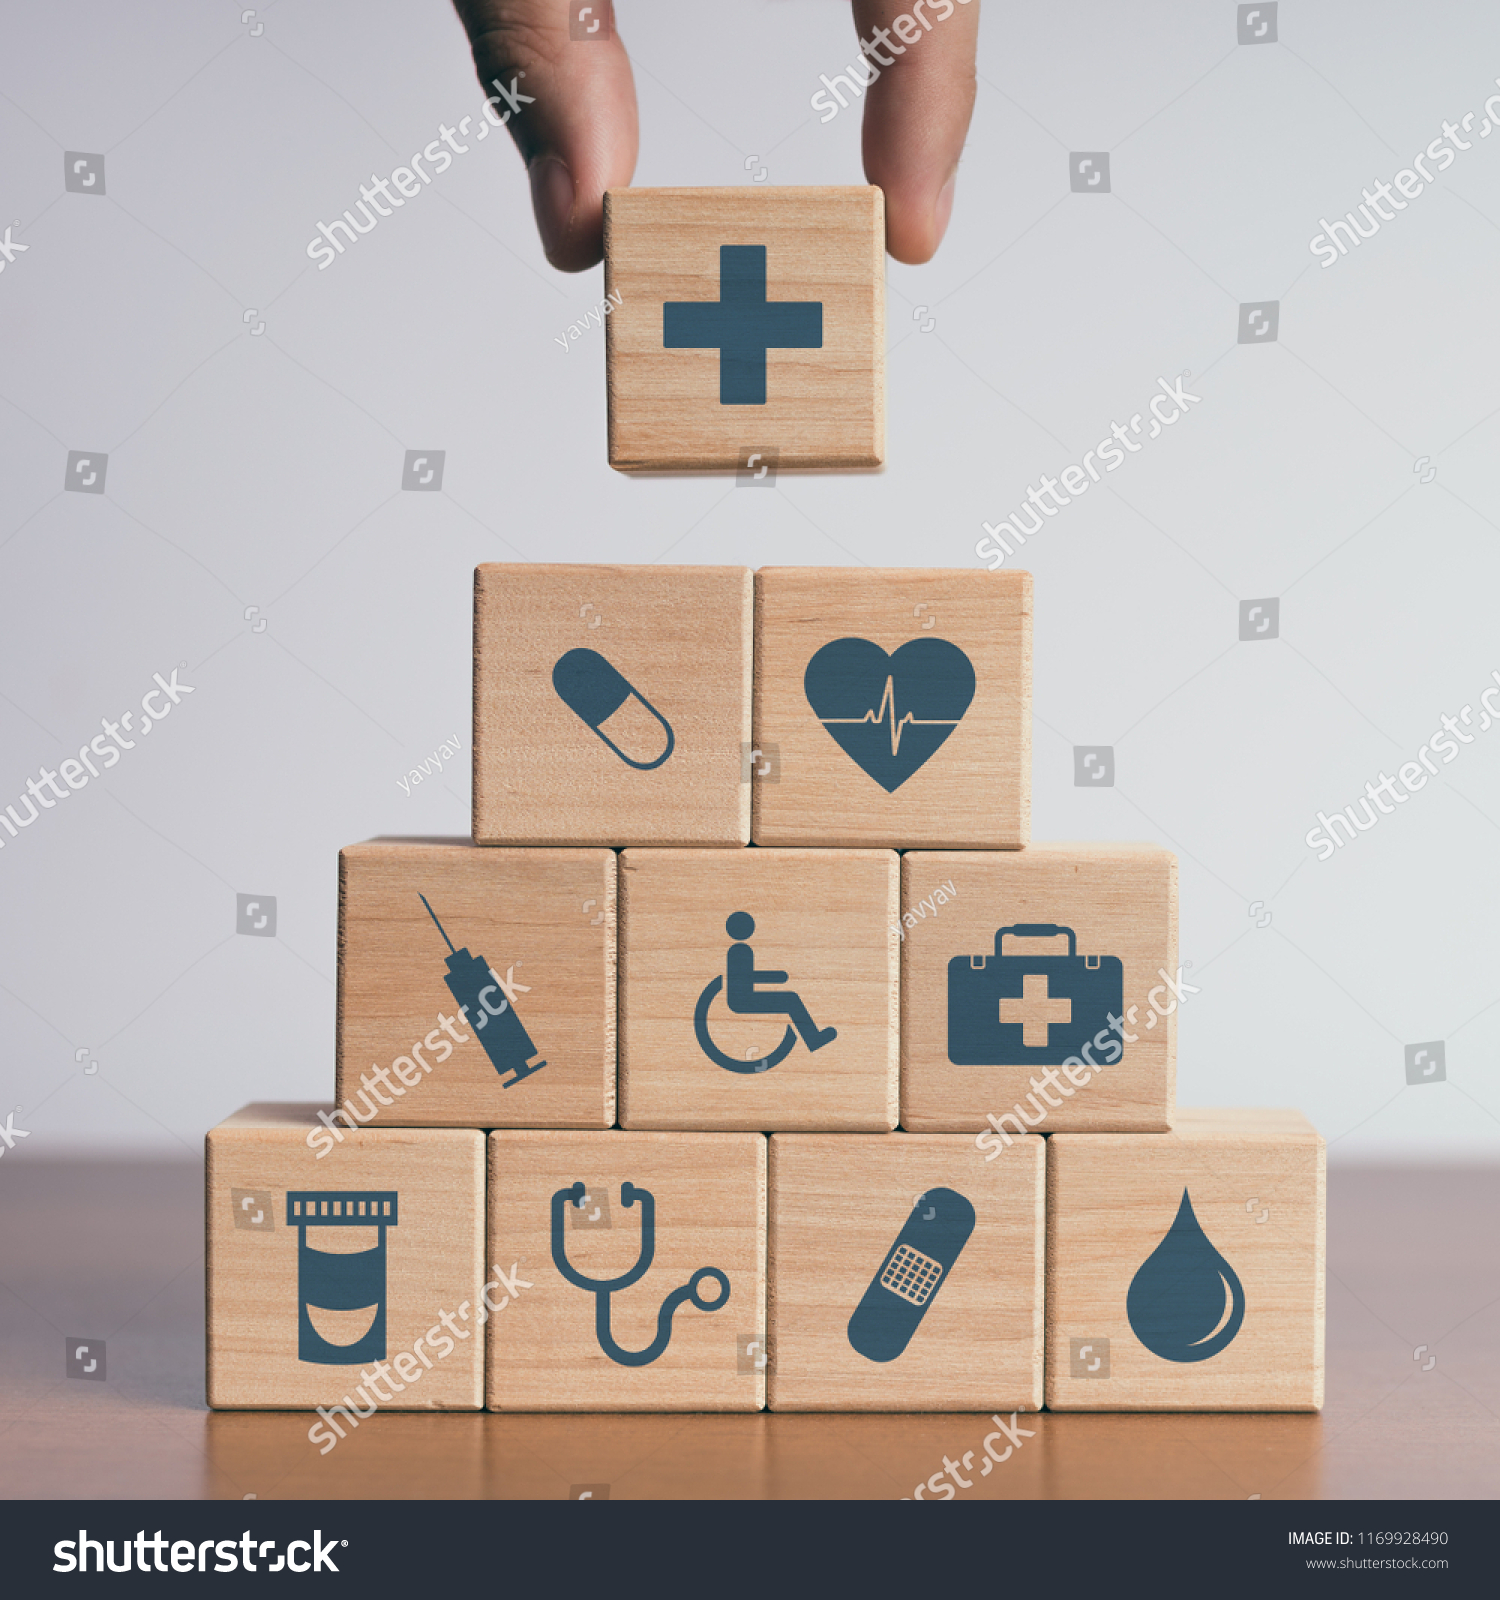 Concept of Insurance for your health, Hand hold wooden block with icon healthcare medical #1169928490